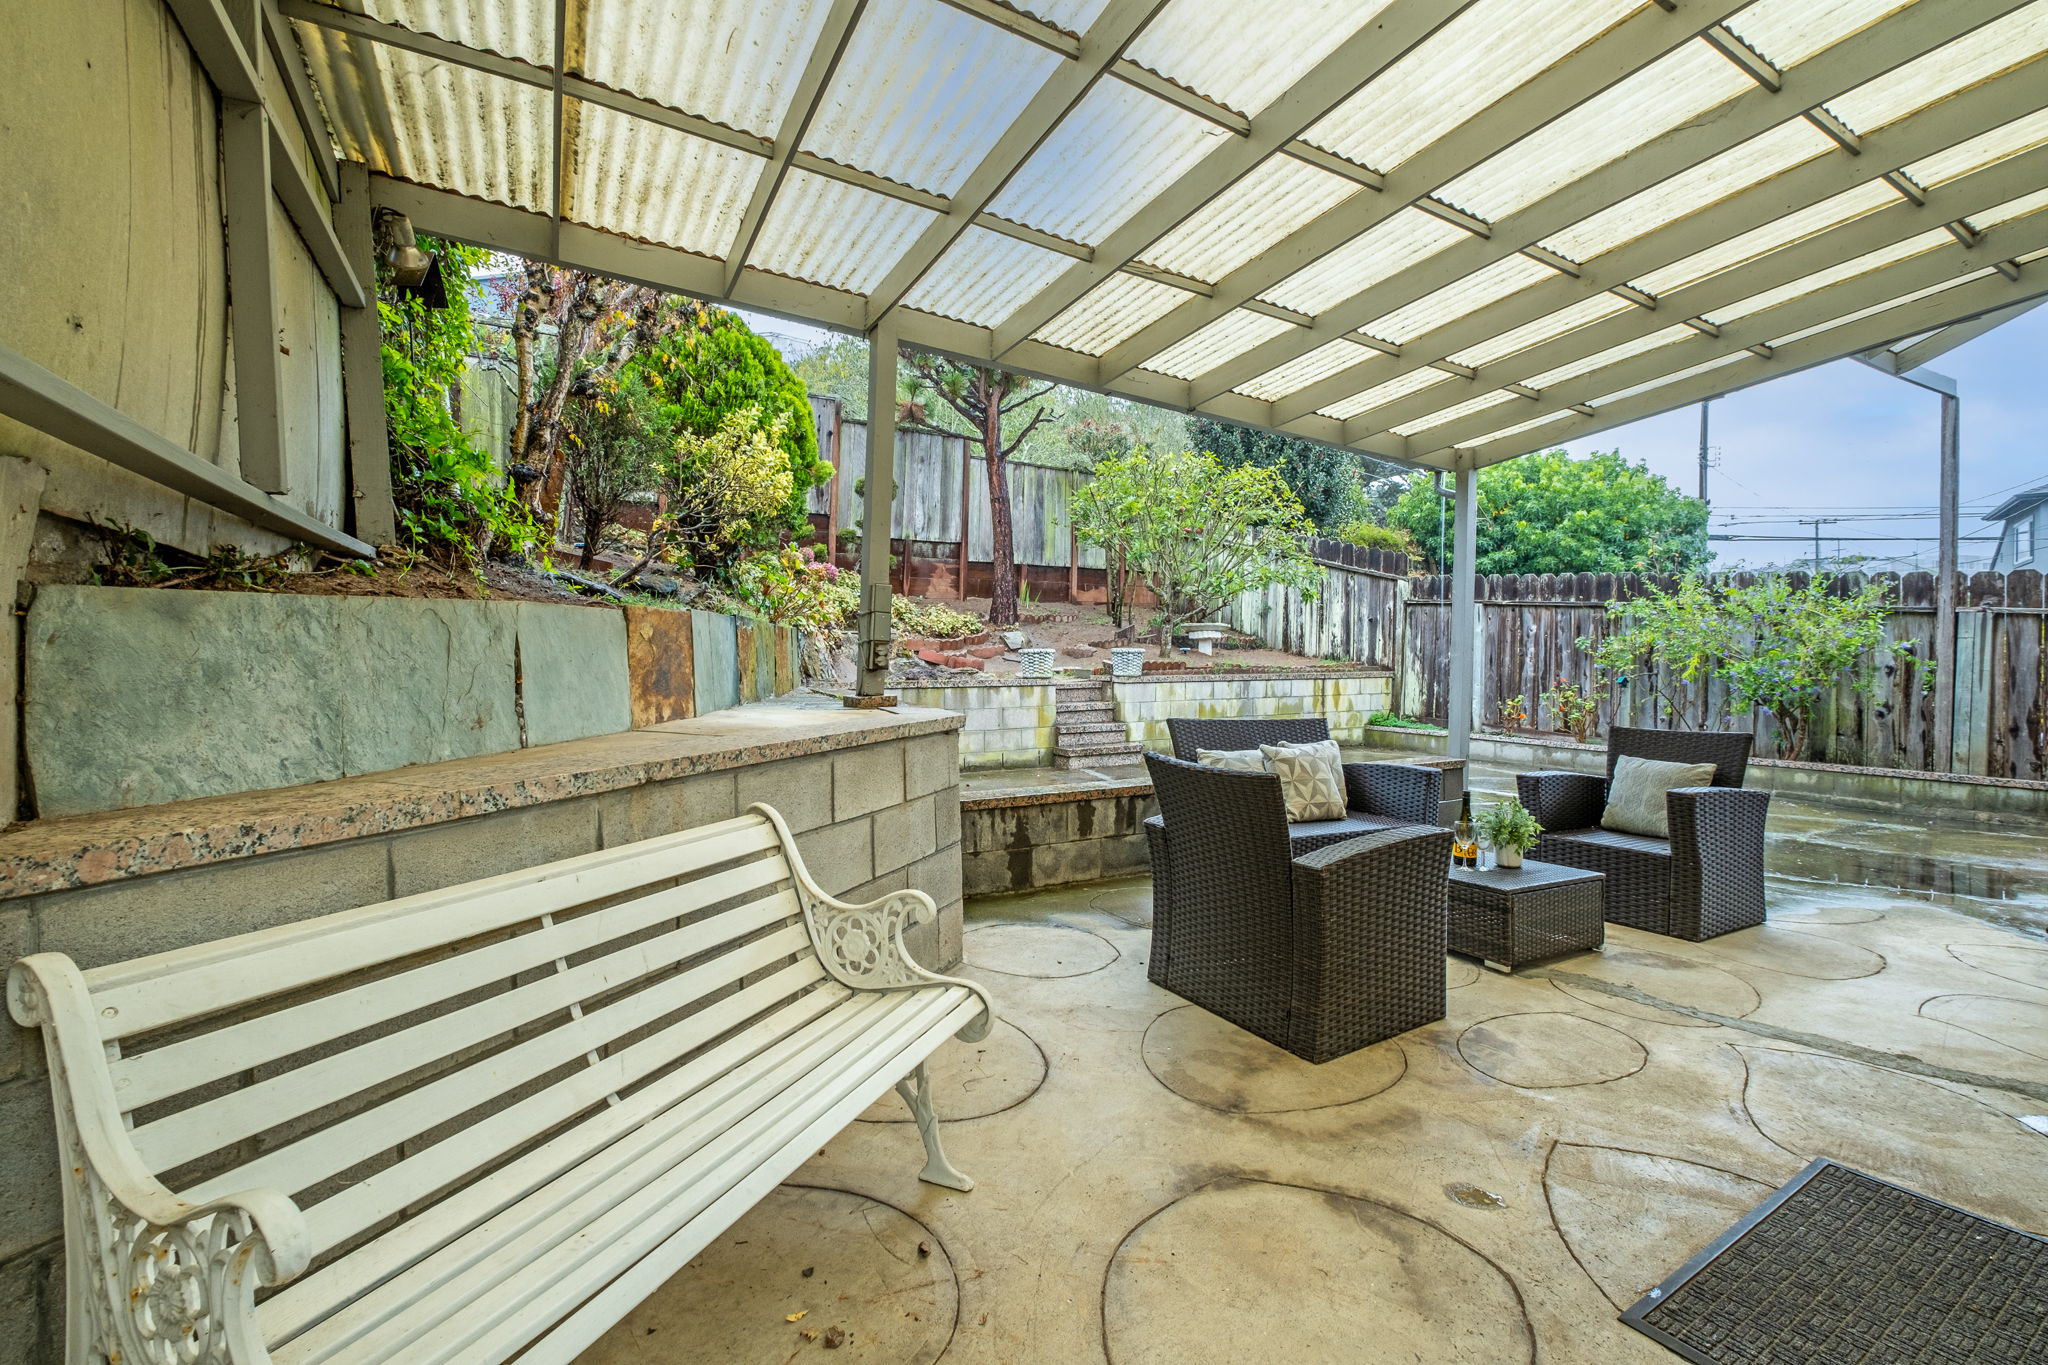 Large Covered Patio Areas